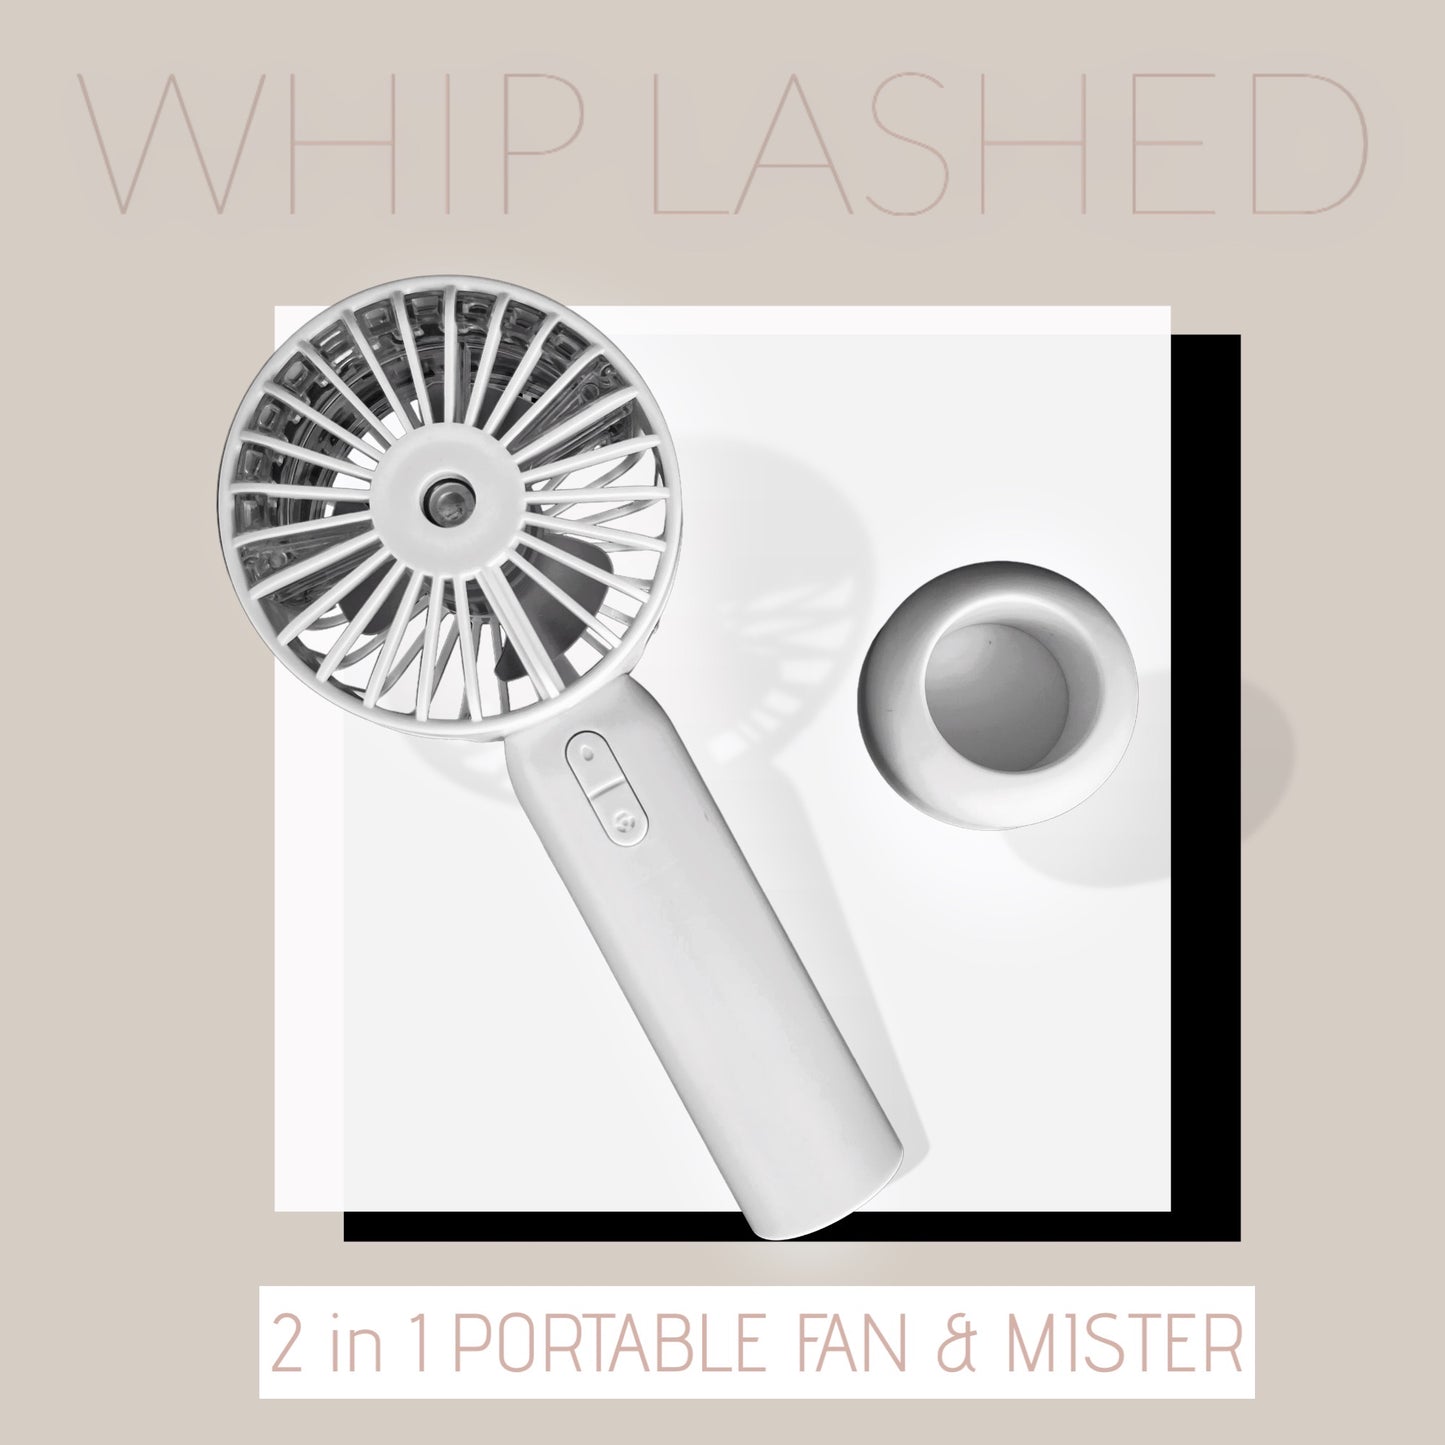 Whip Lashed 2 in 1 Fan and Mister